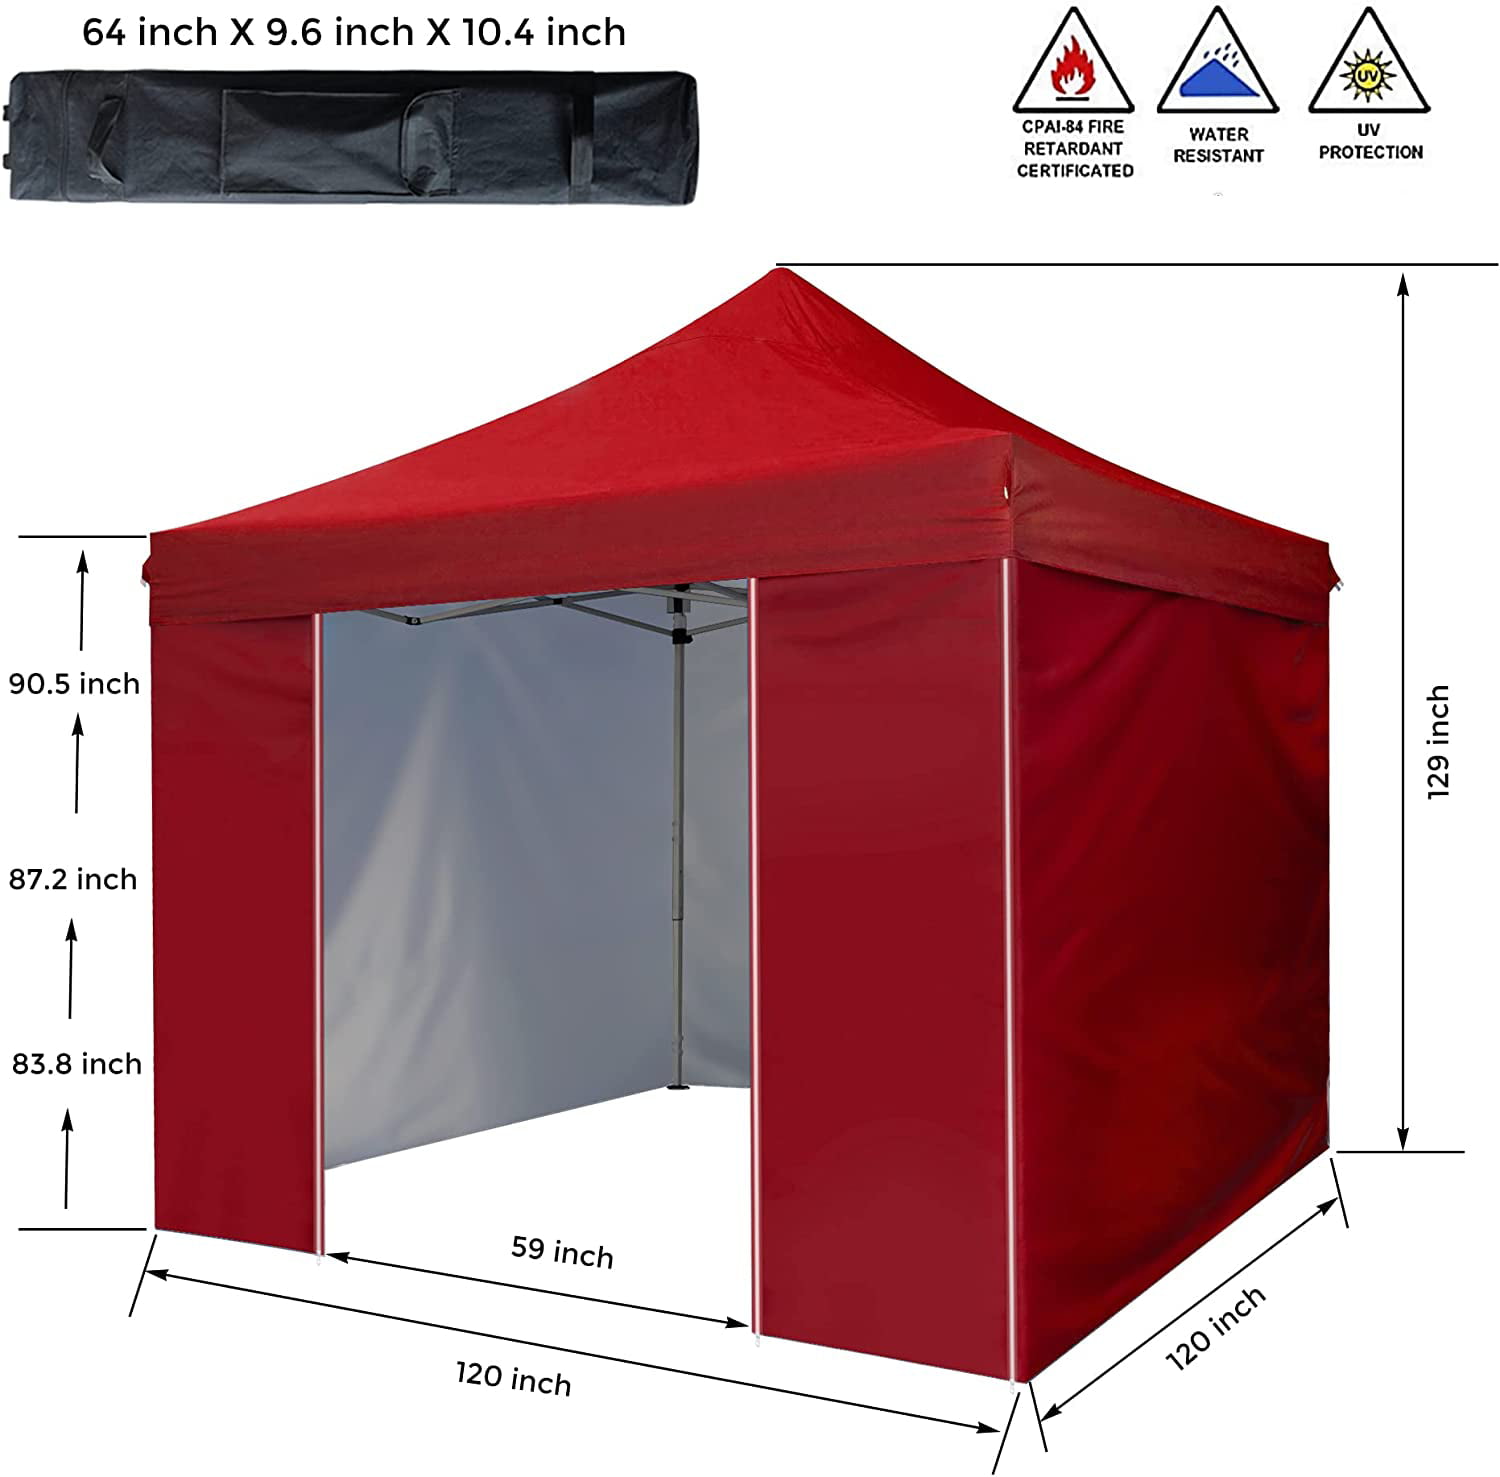 AsterOutdoor 10' x 10' Pop Up Sidewall Canopy Tent - 5 pieces of